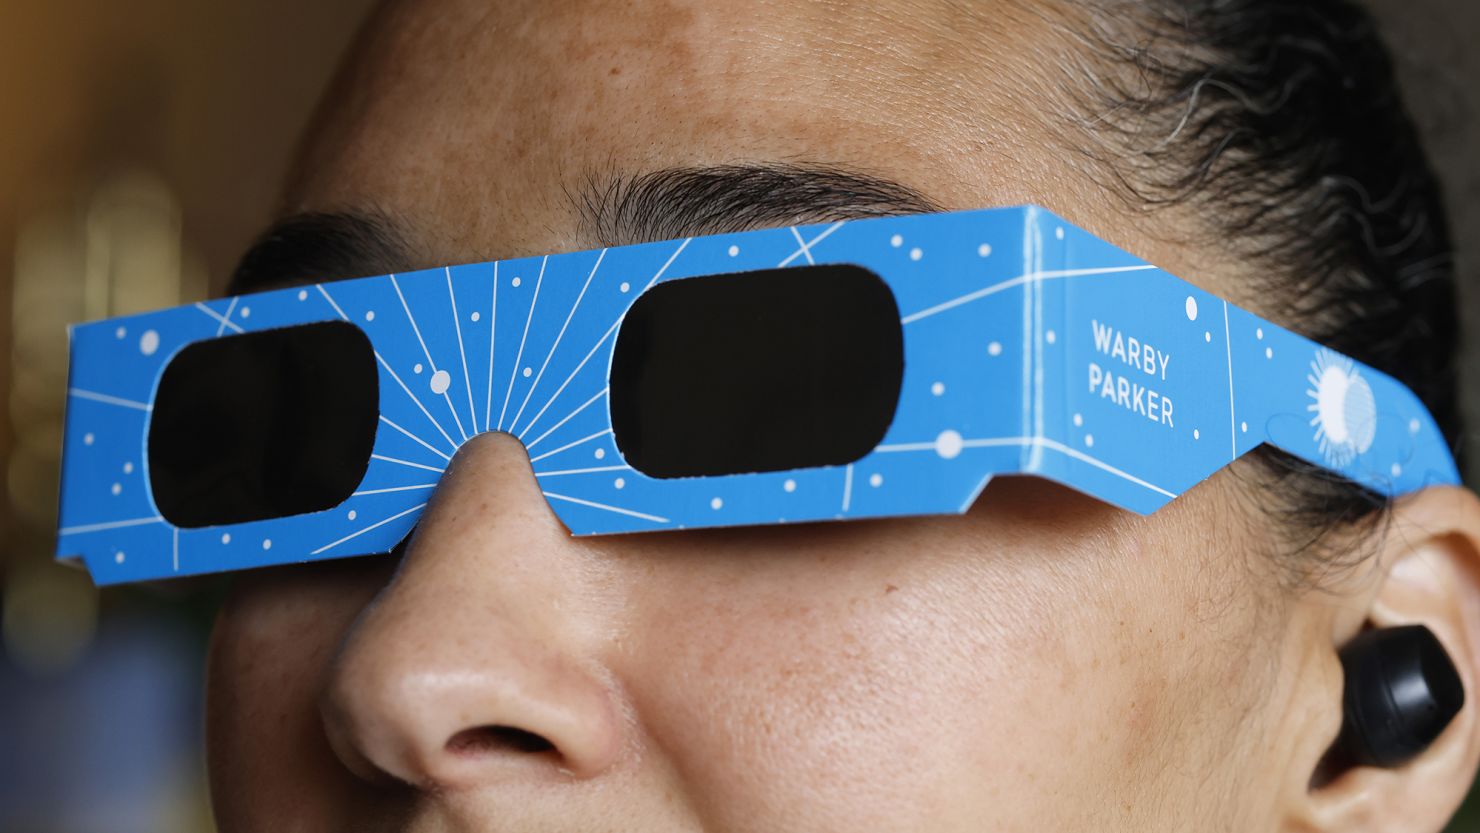 Warby Parker is providing solar eclipse viewing glasses at all of its locations.